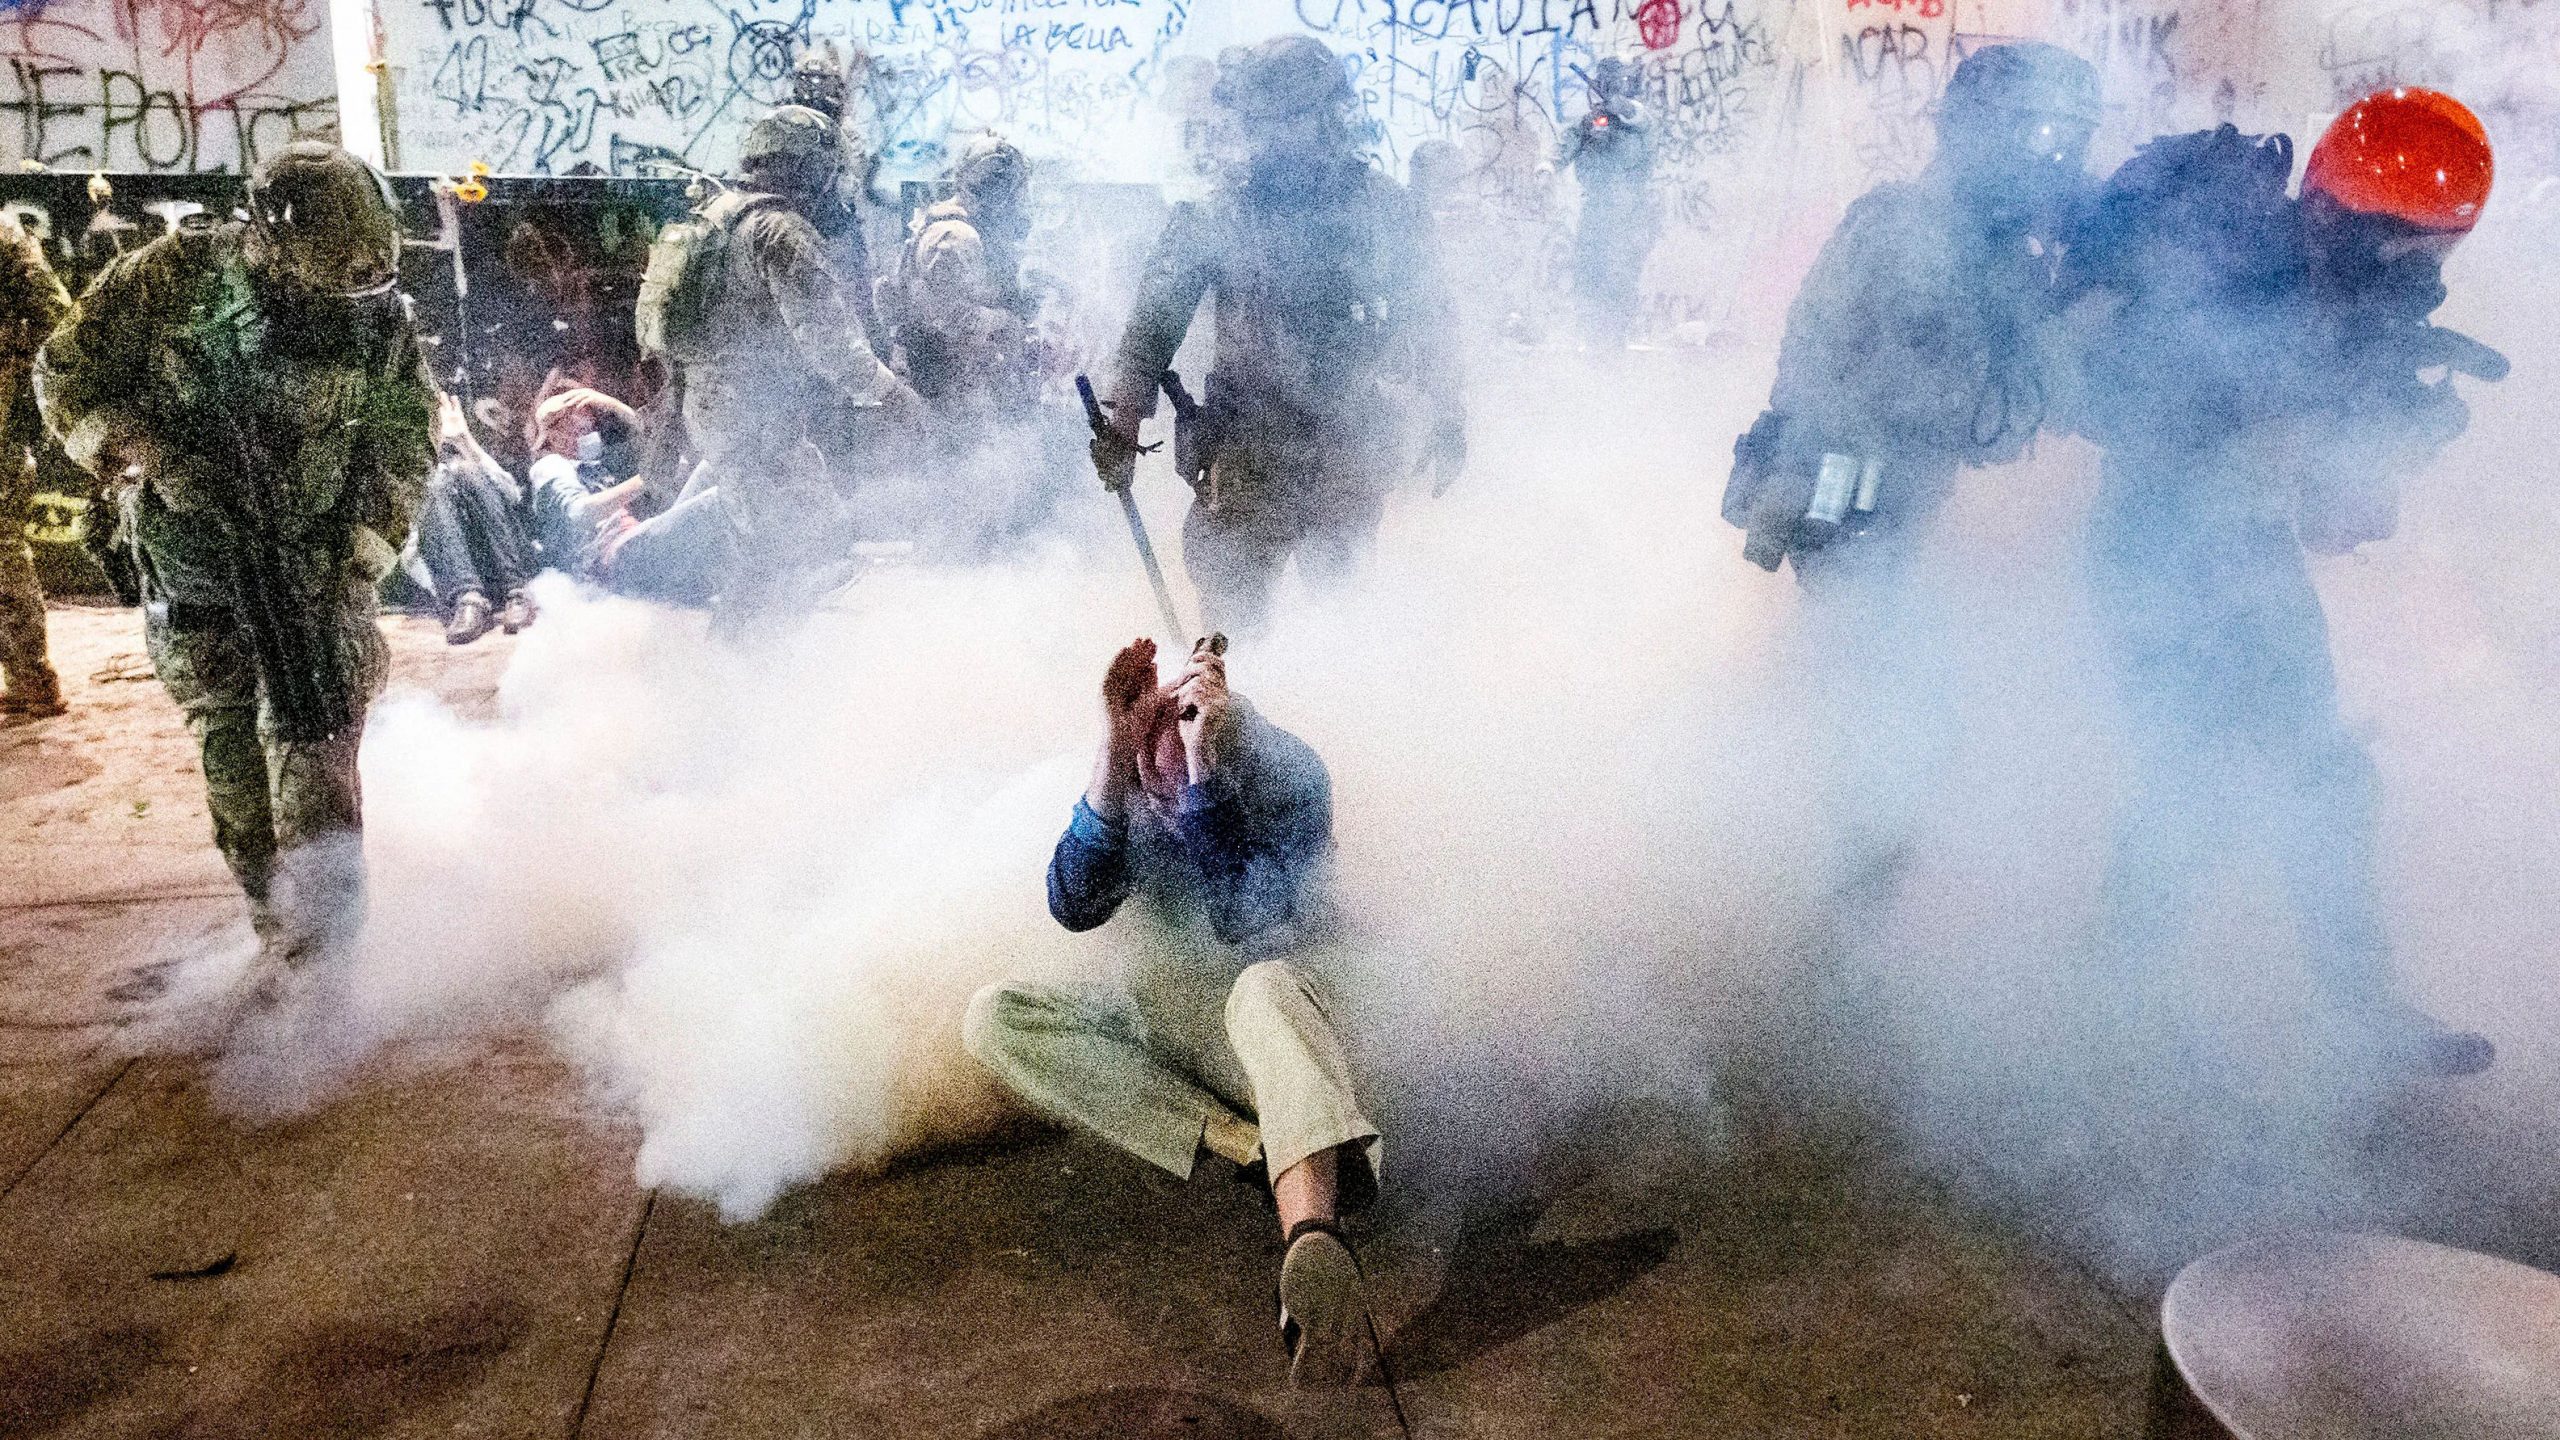 Watch: Portland mayor teargassed at protest against federal crackdown